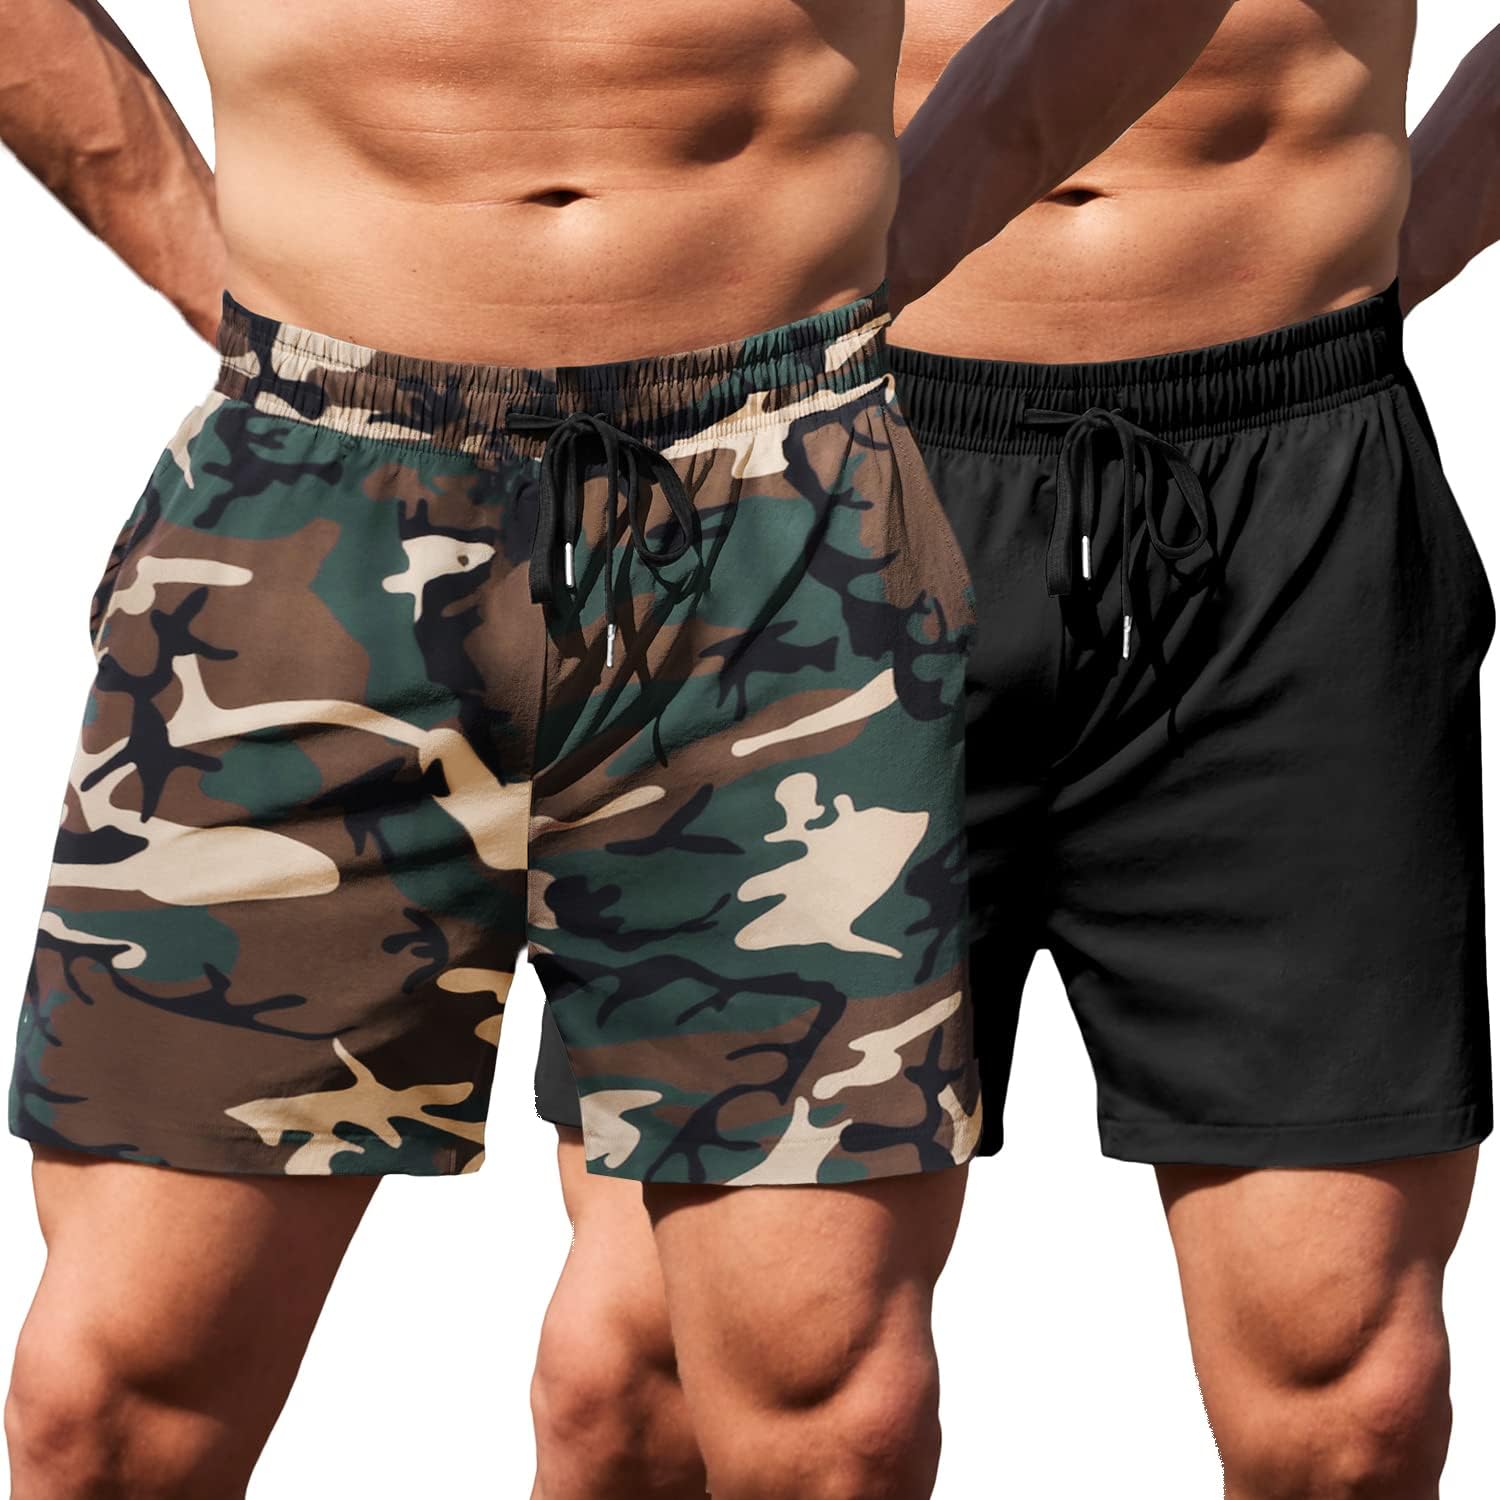 COOFANDY Men's Running Athletic Shorts 5 Inch 2 Pack Gym Workout Shorts  Fitted Exercise Hiking Shorts with Zipper Pocket